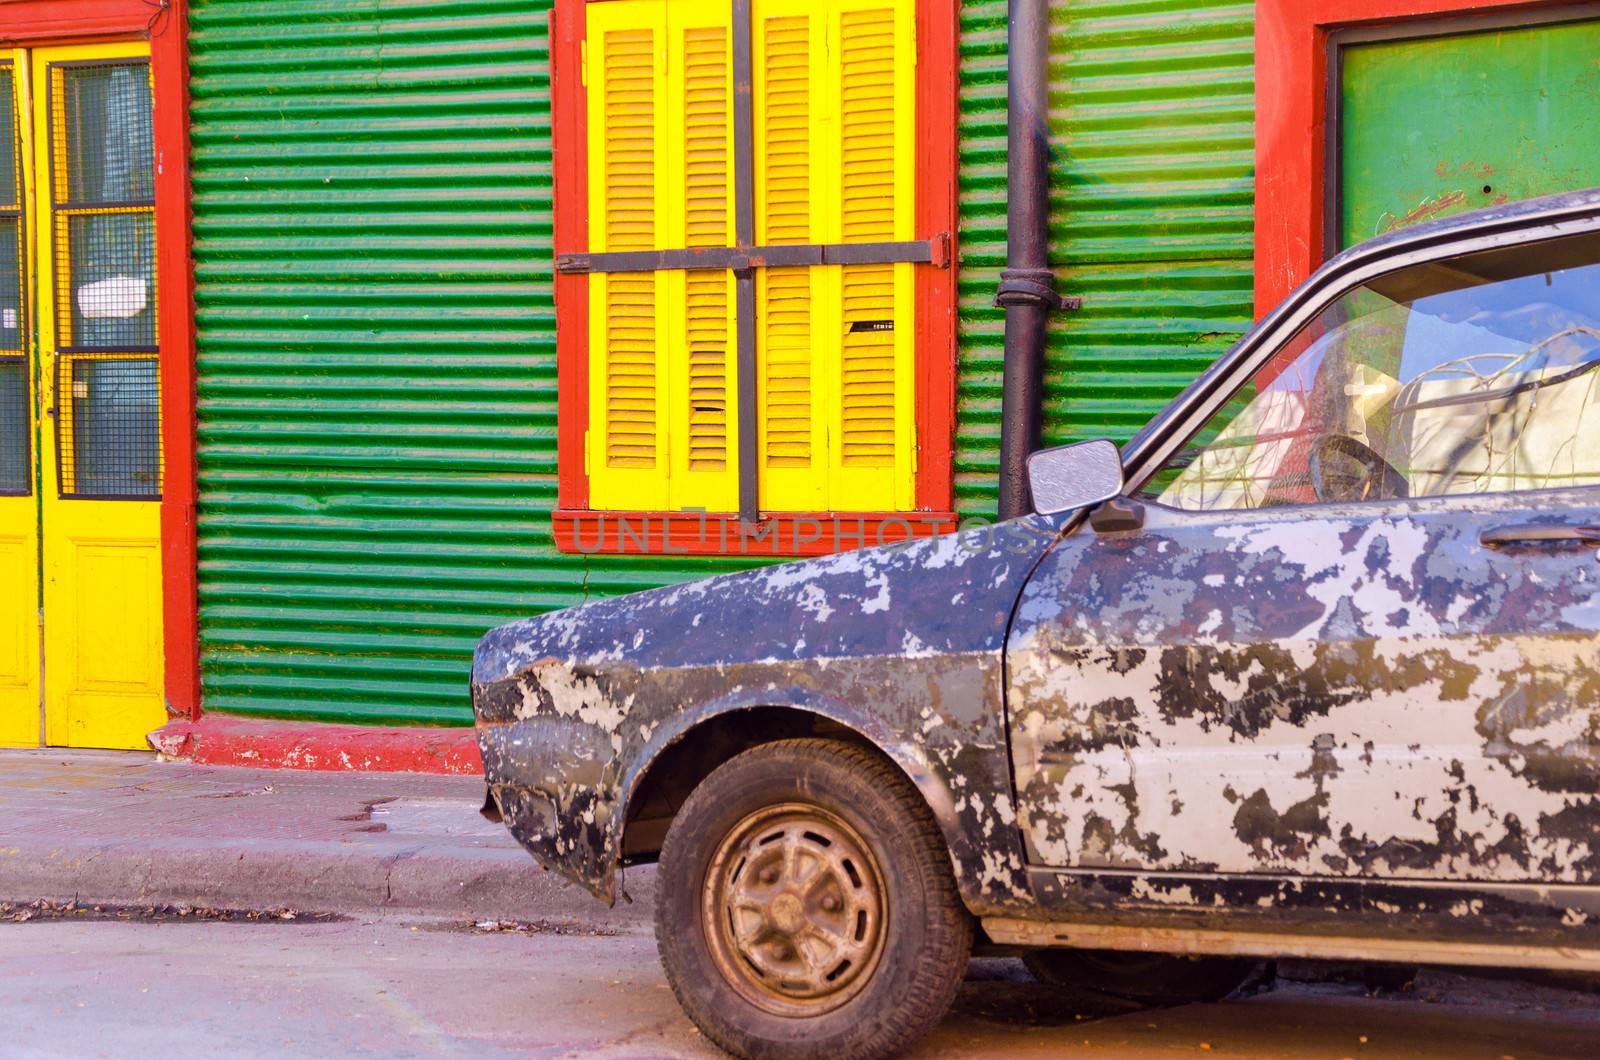 Old damaged car in front of a brightly colored building in La Boca neighborhood of Buenos Aires